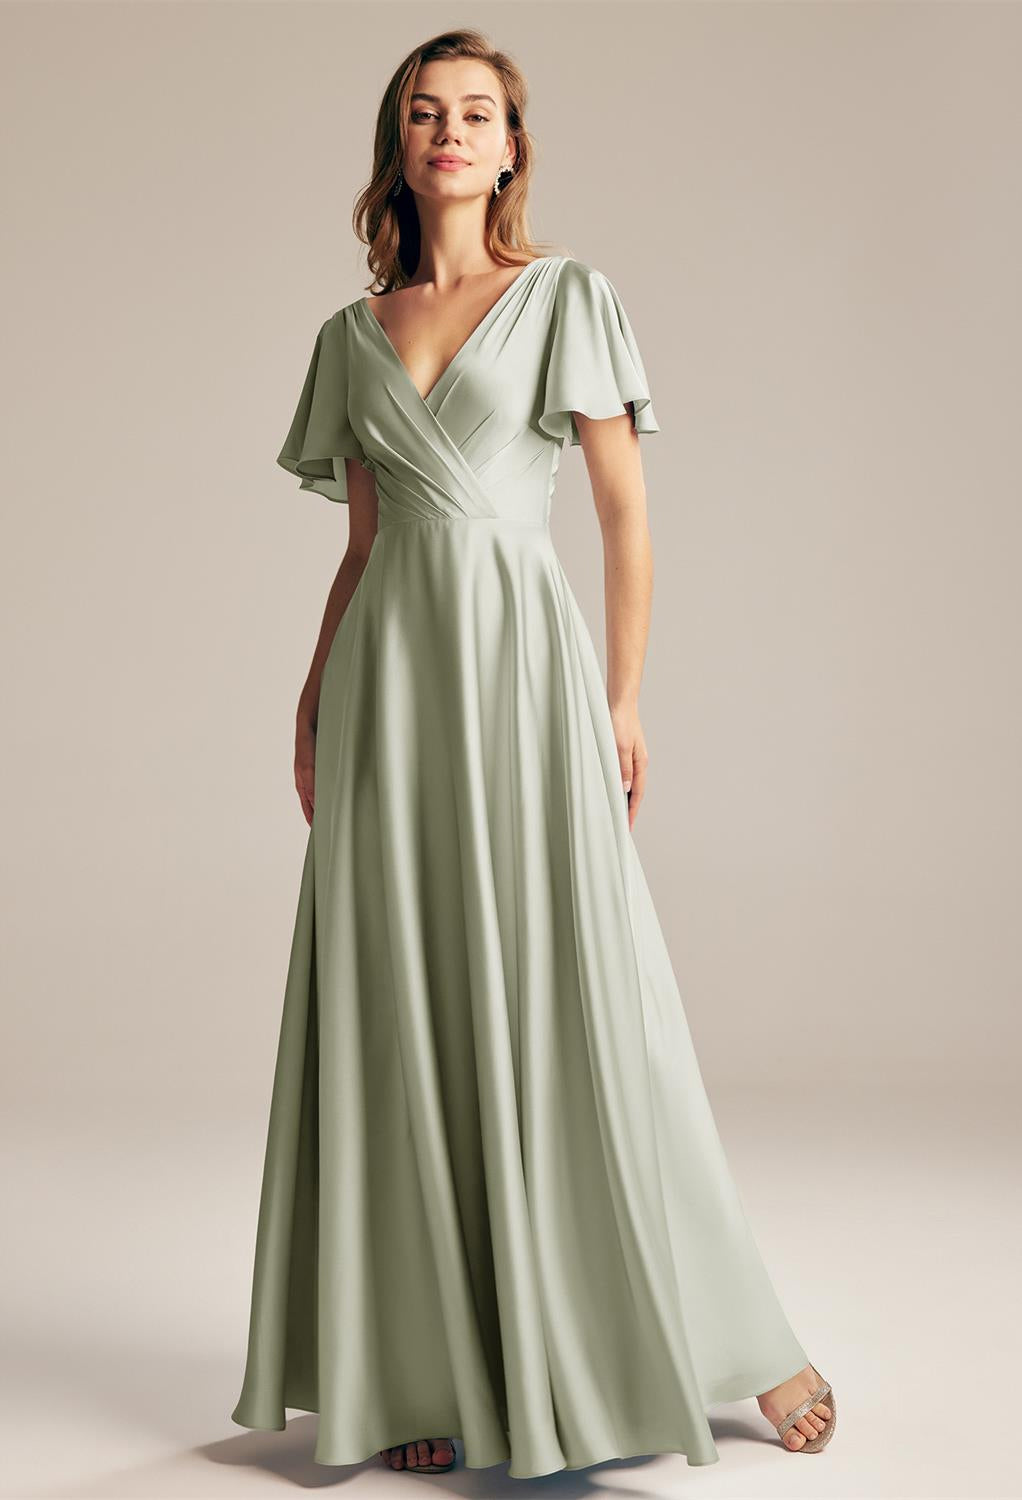 The bridesmaid is wearing a Furst - Satin Charmeuse Bridesmaid Dress - Off The Rack purchased from Bergamot Bridal.